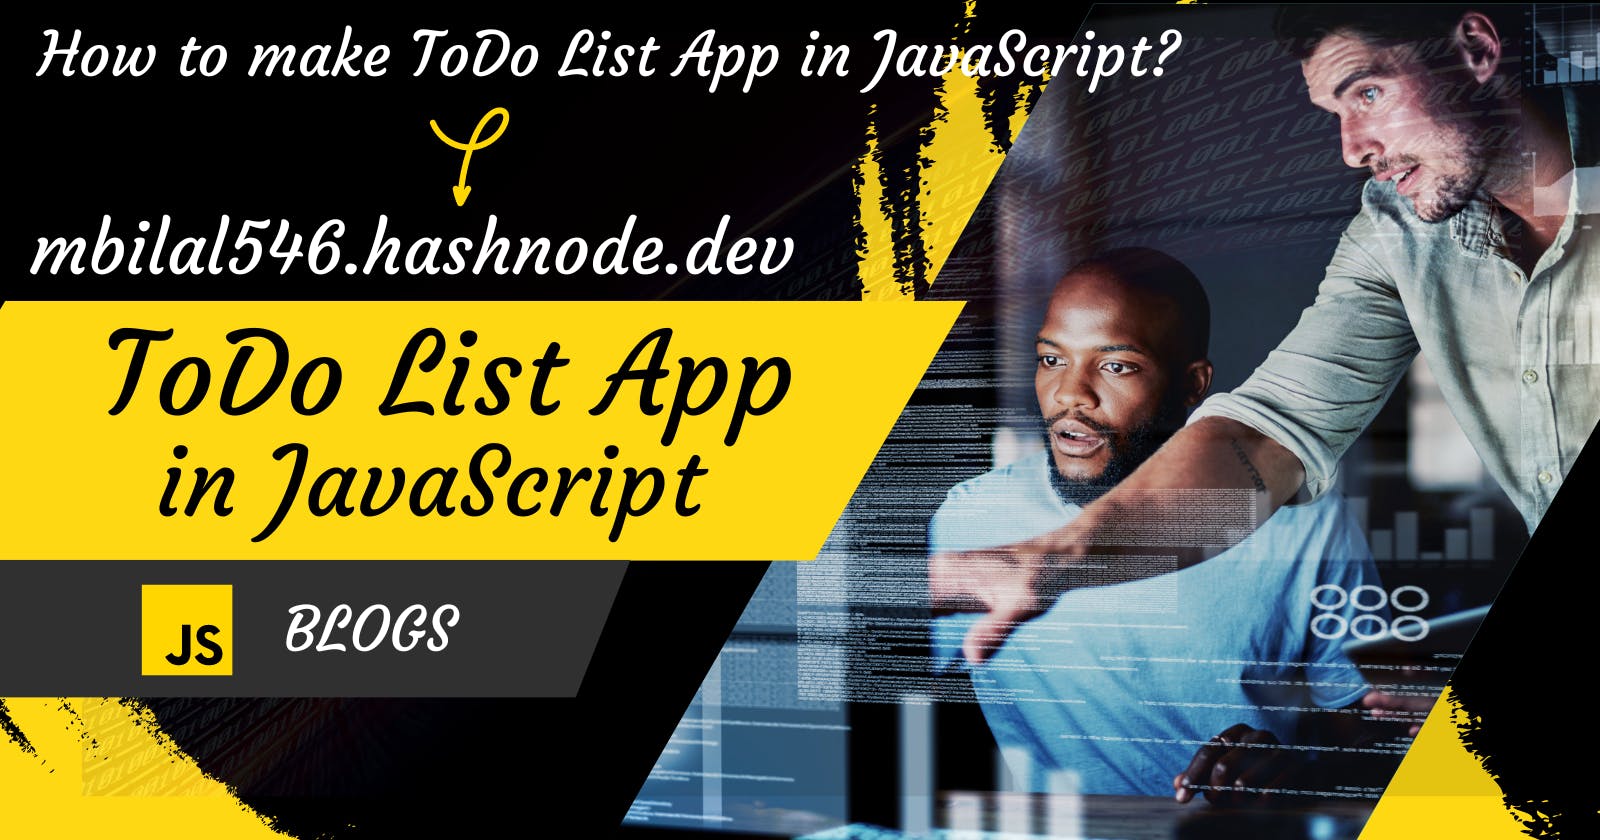 How to make a To-Do List App in JavaScript